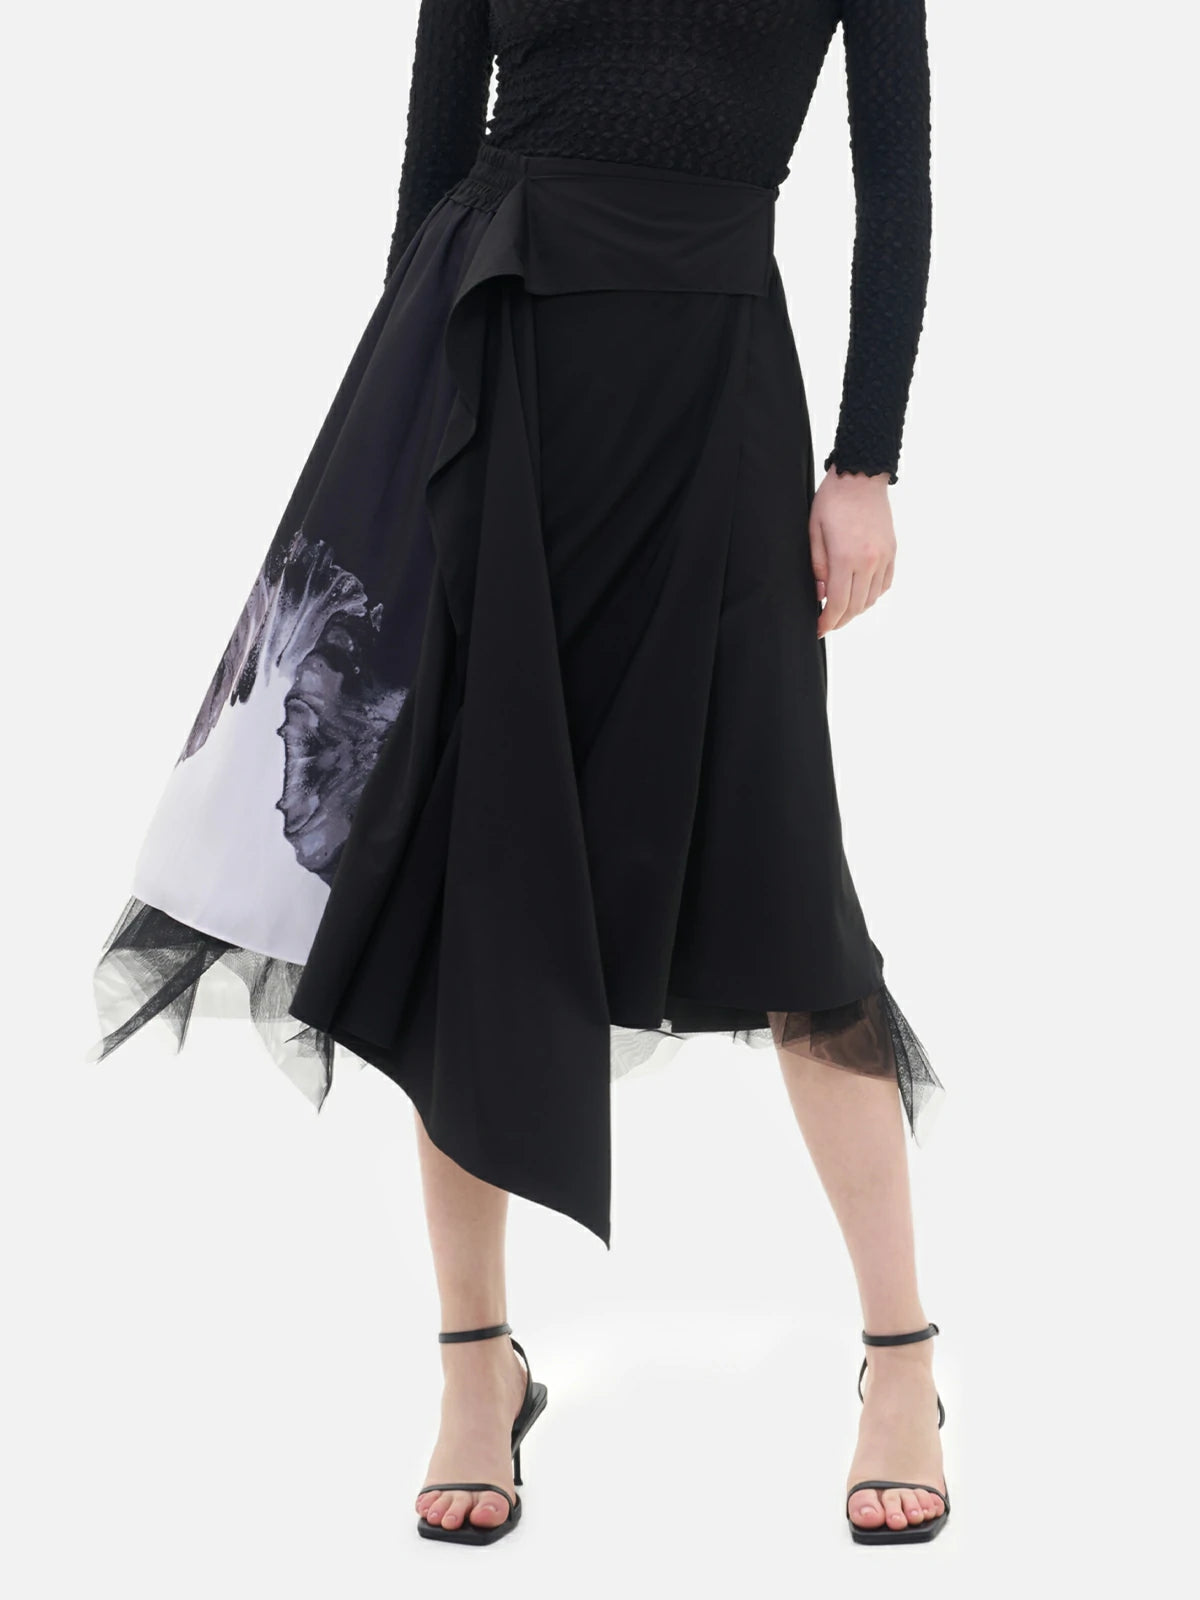 Elevate your style with this reversible panel skirt, featuring a abstract print design and delicate mesh detailing at the hem.